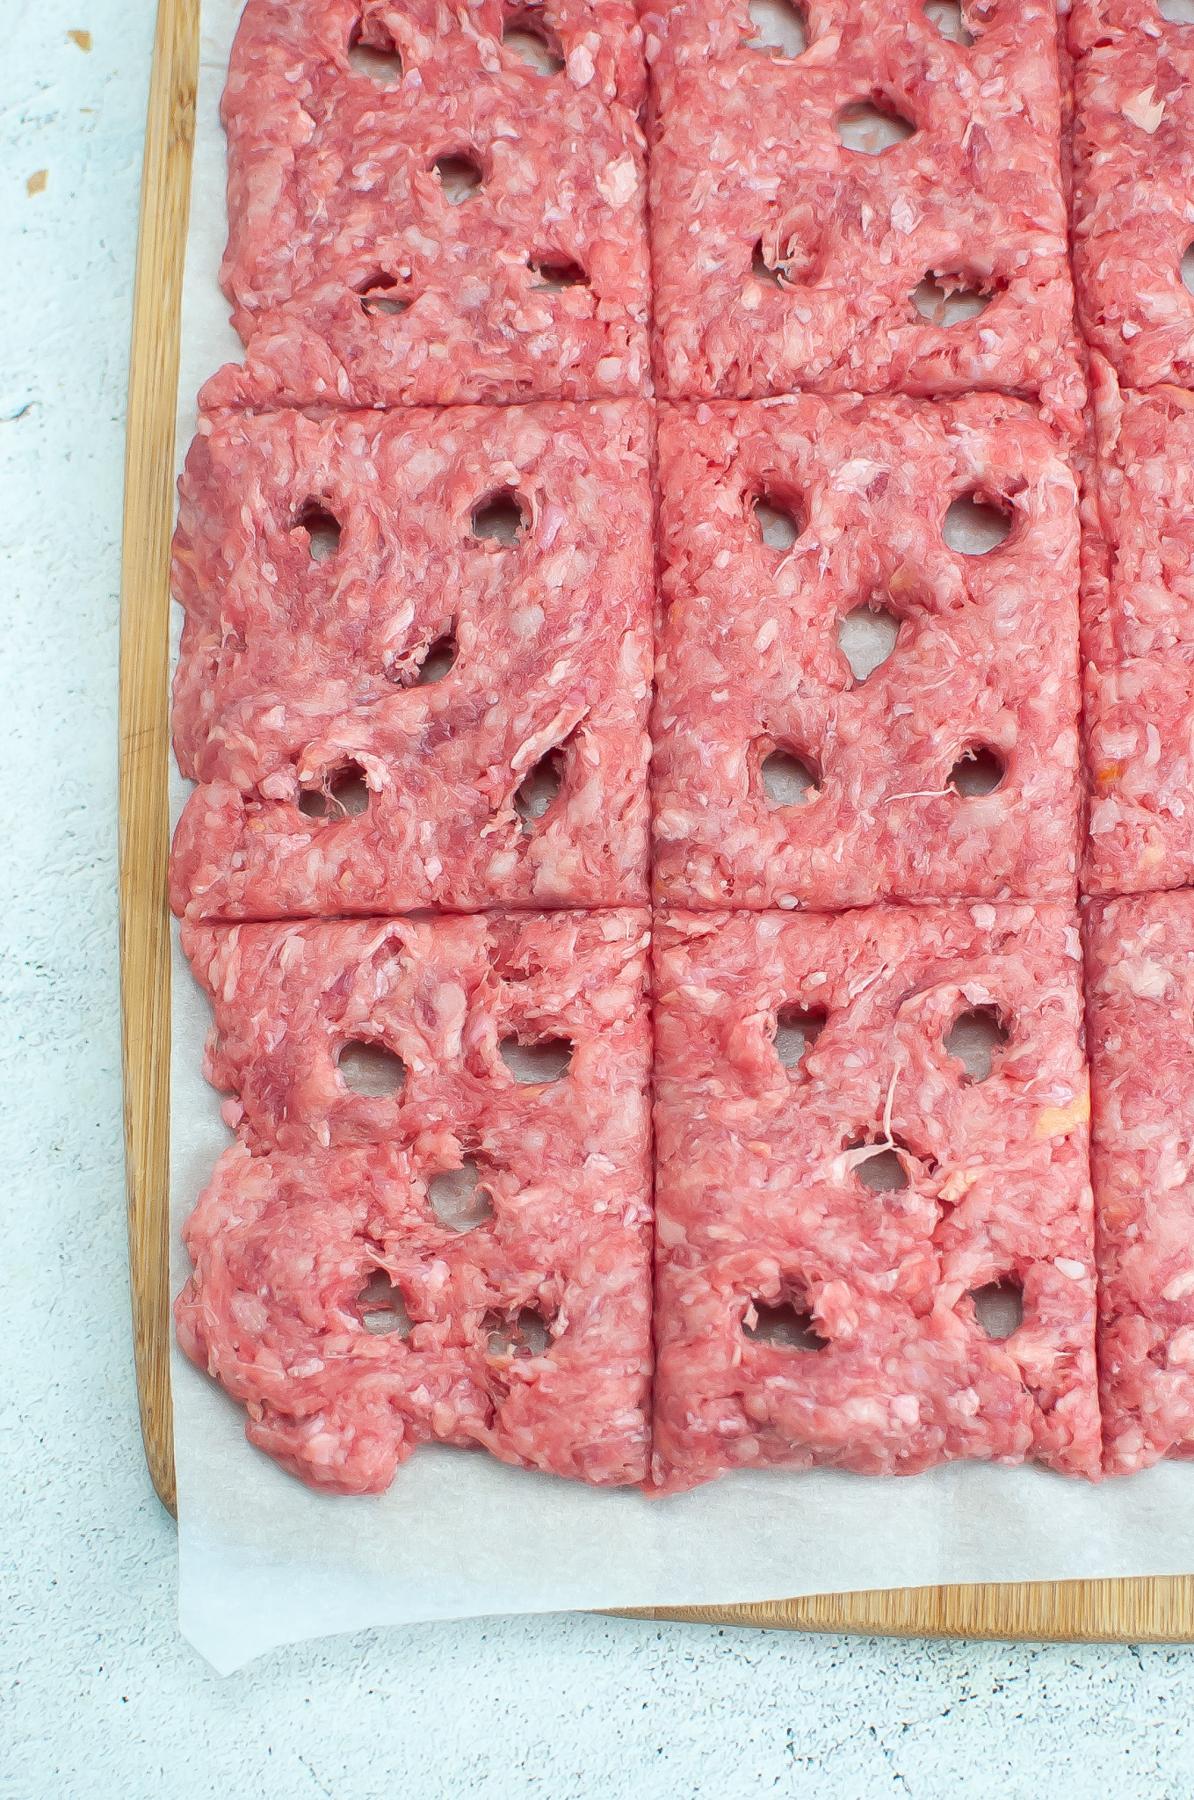 Hamburger meat with holes in it.